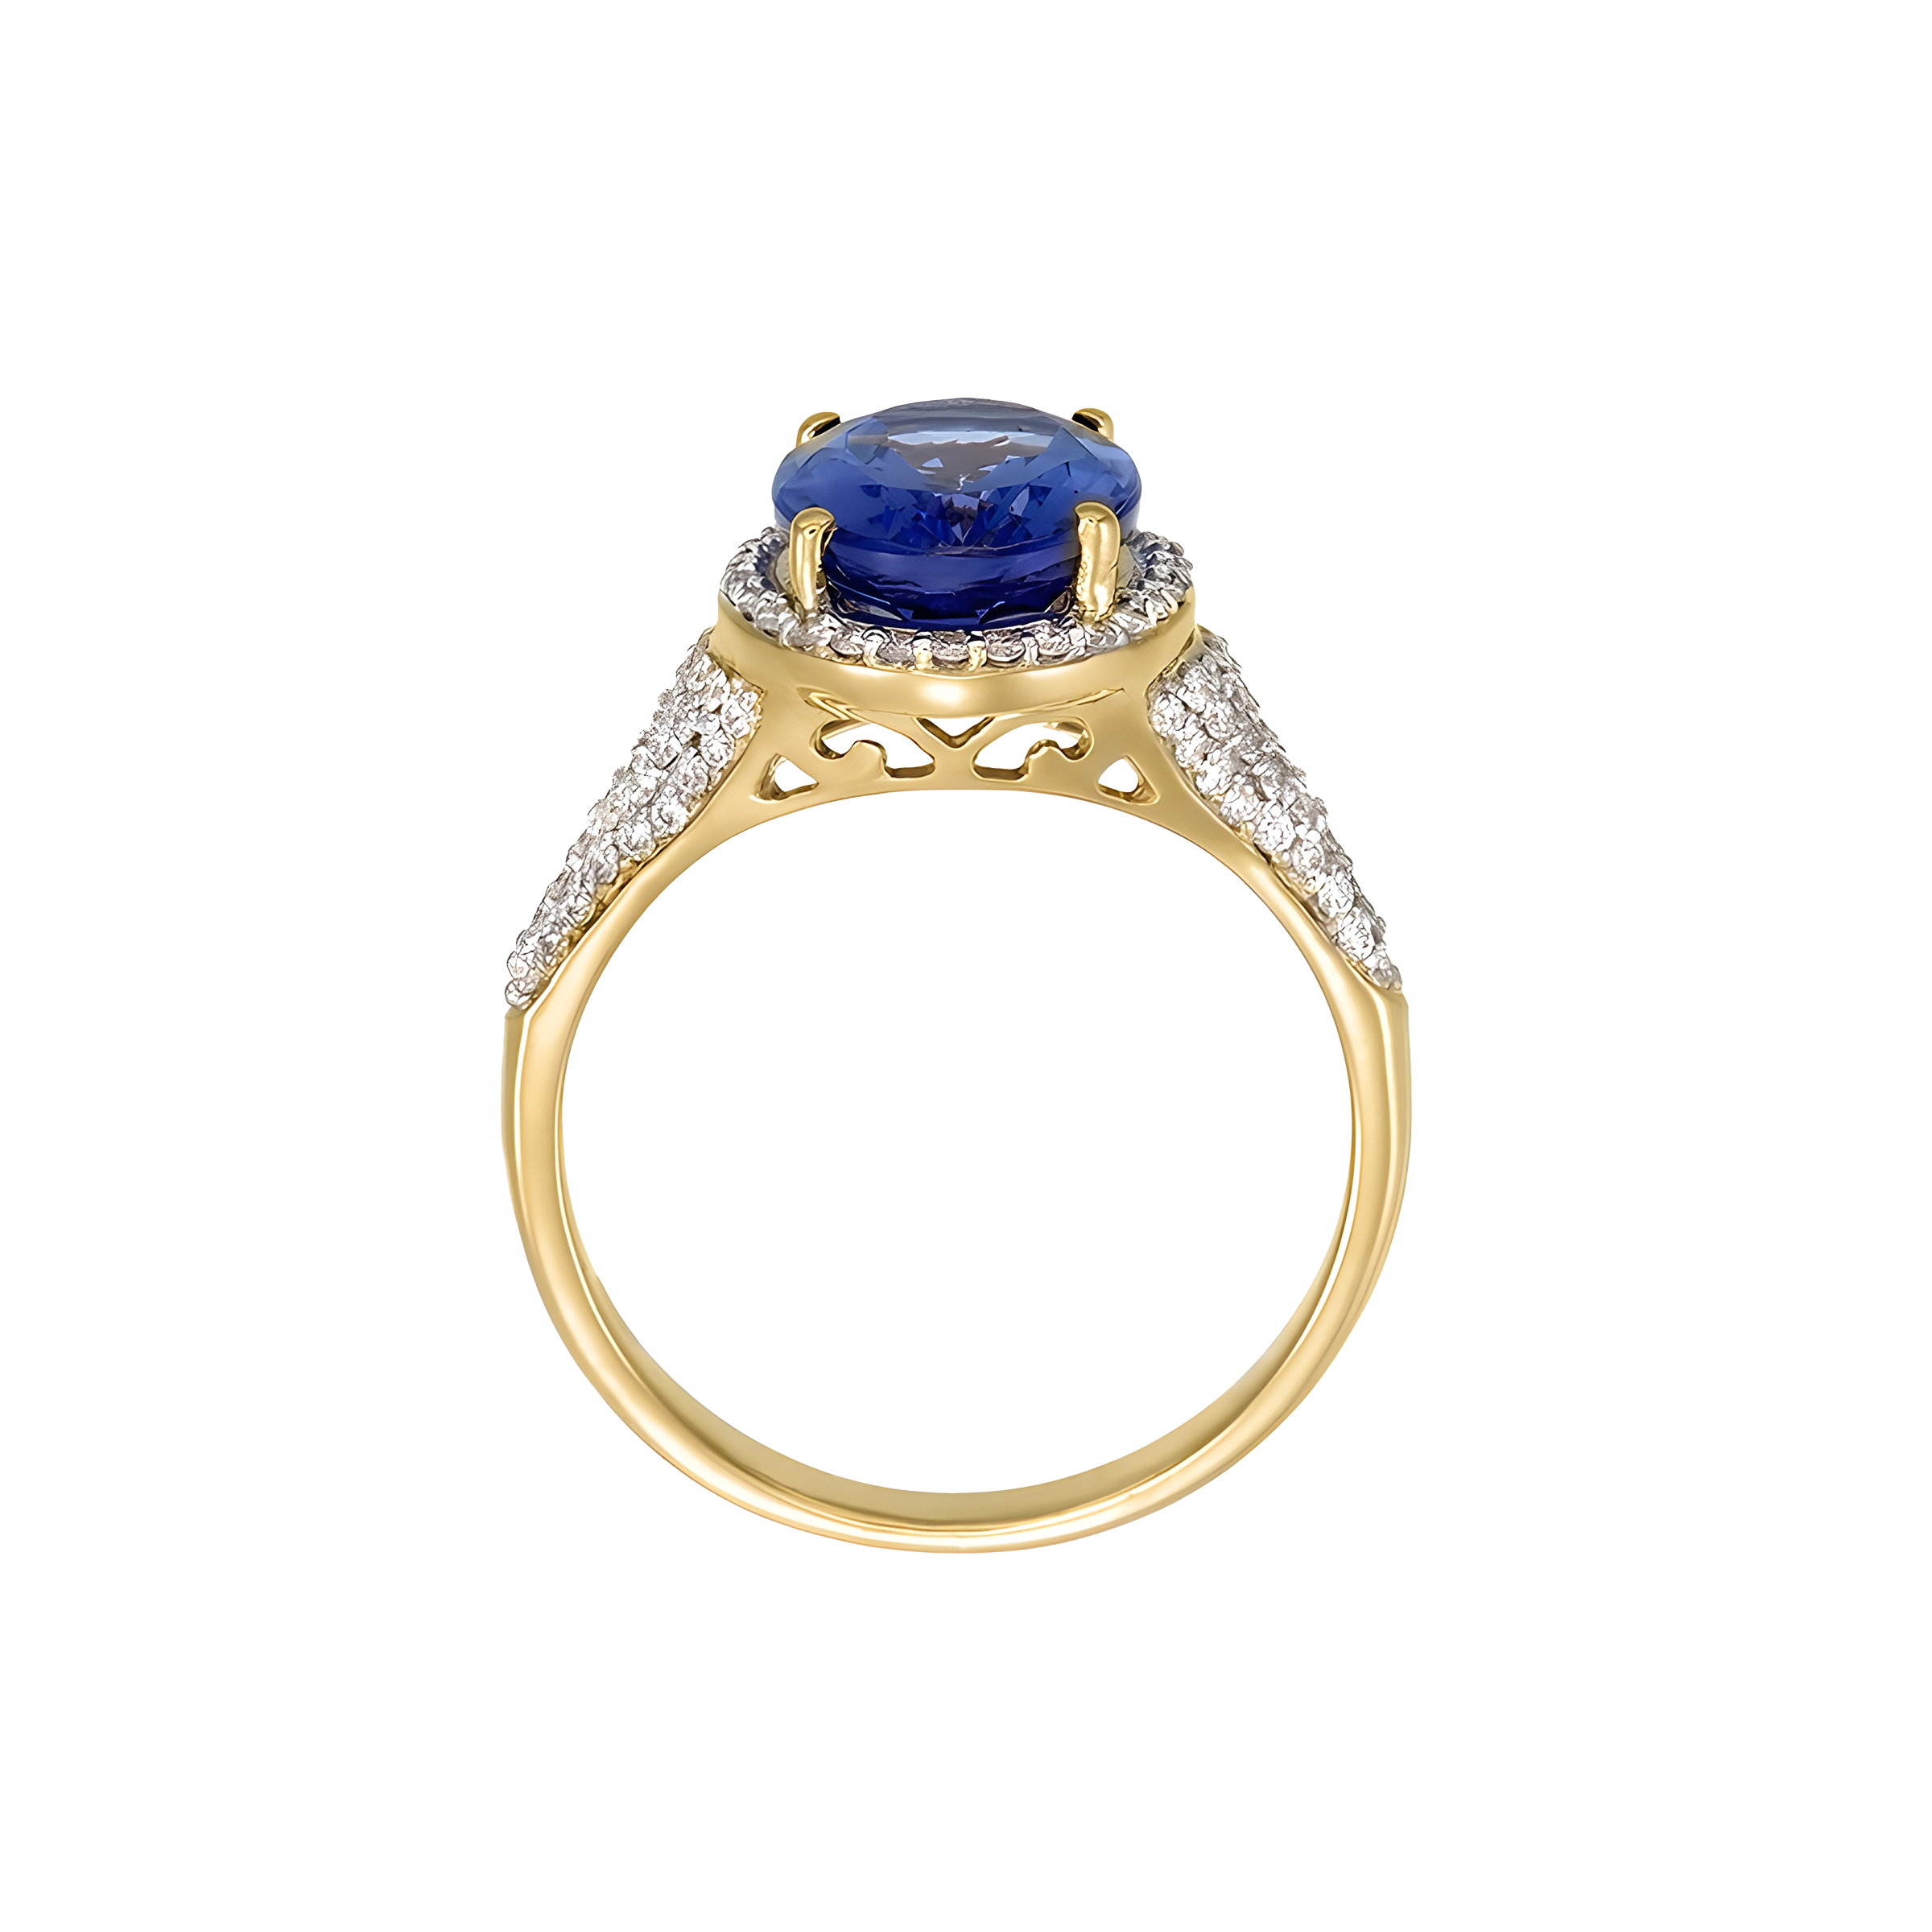 Oval Tanzanite and Diamond Ring in 18k Yellow Gold